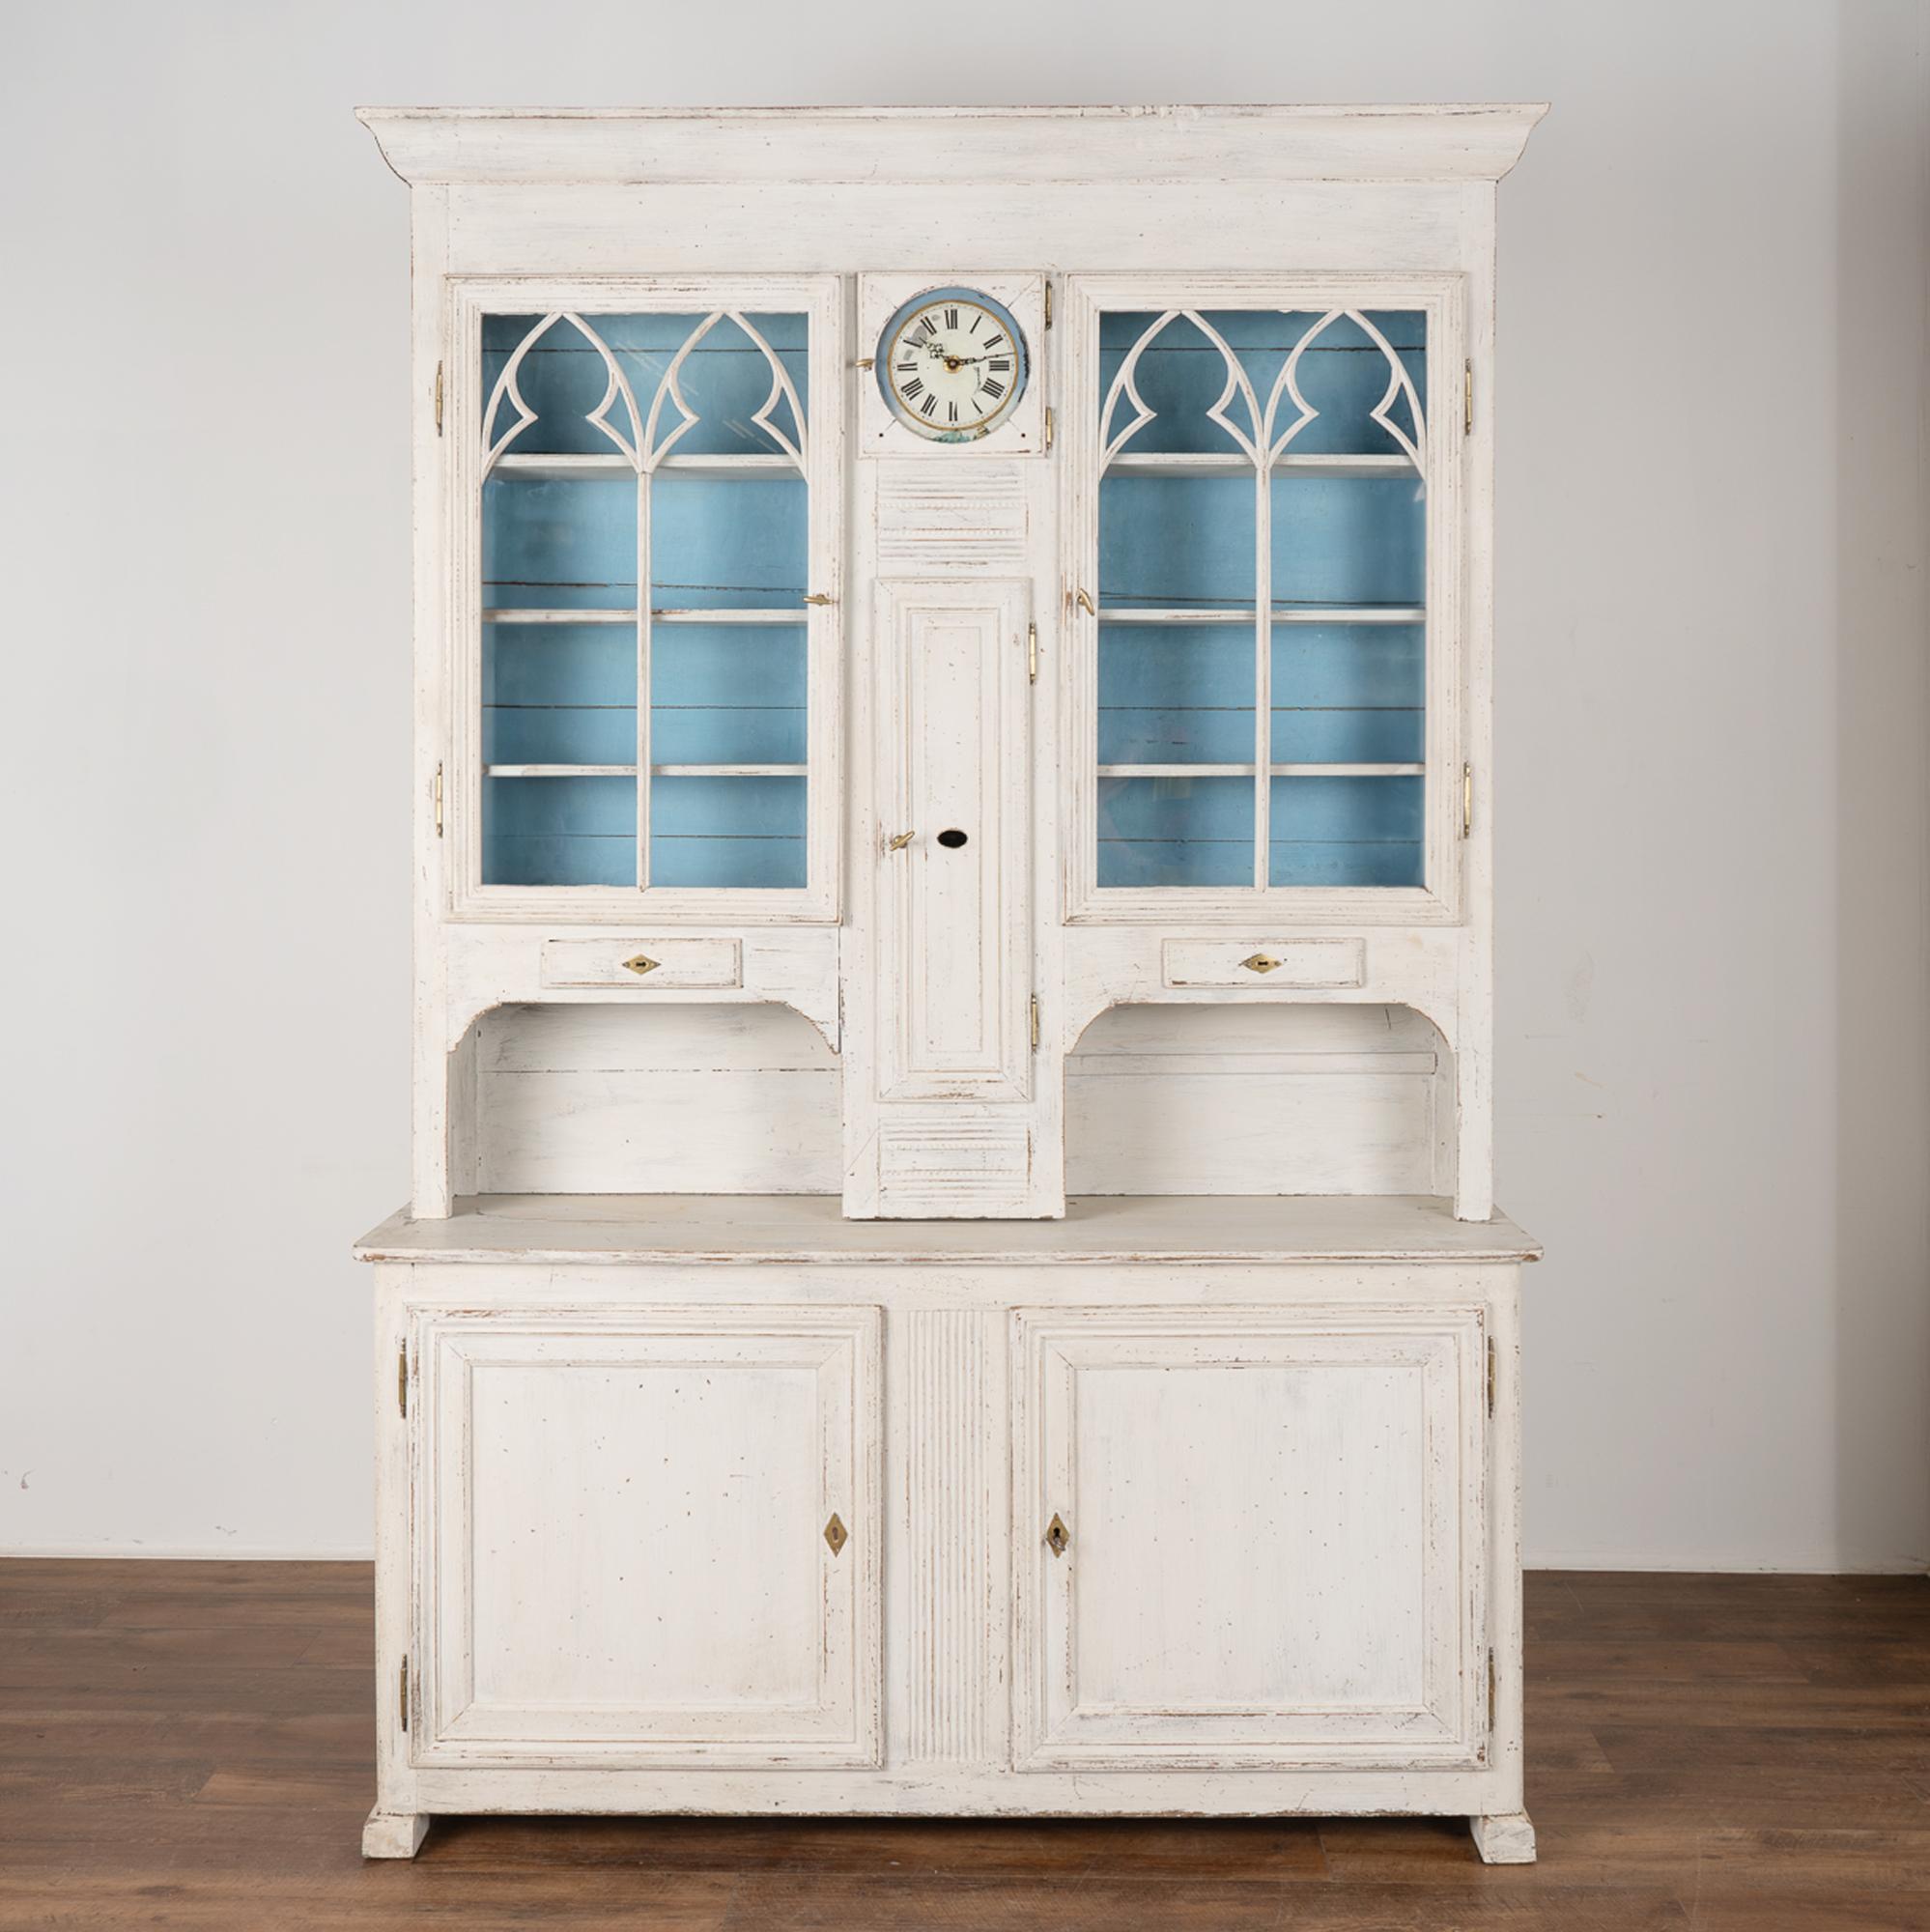 Swedish Antique White Painted Display Cabinet Cupboard with Clock, Sweden circa 1840-60